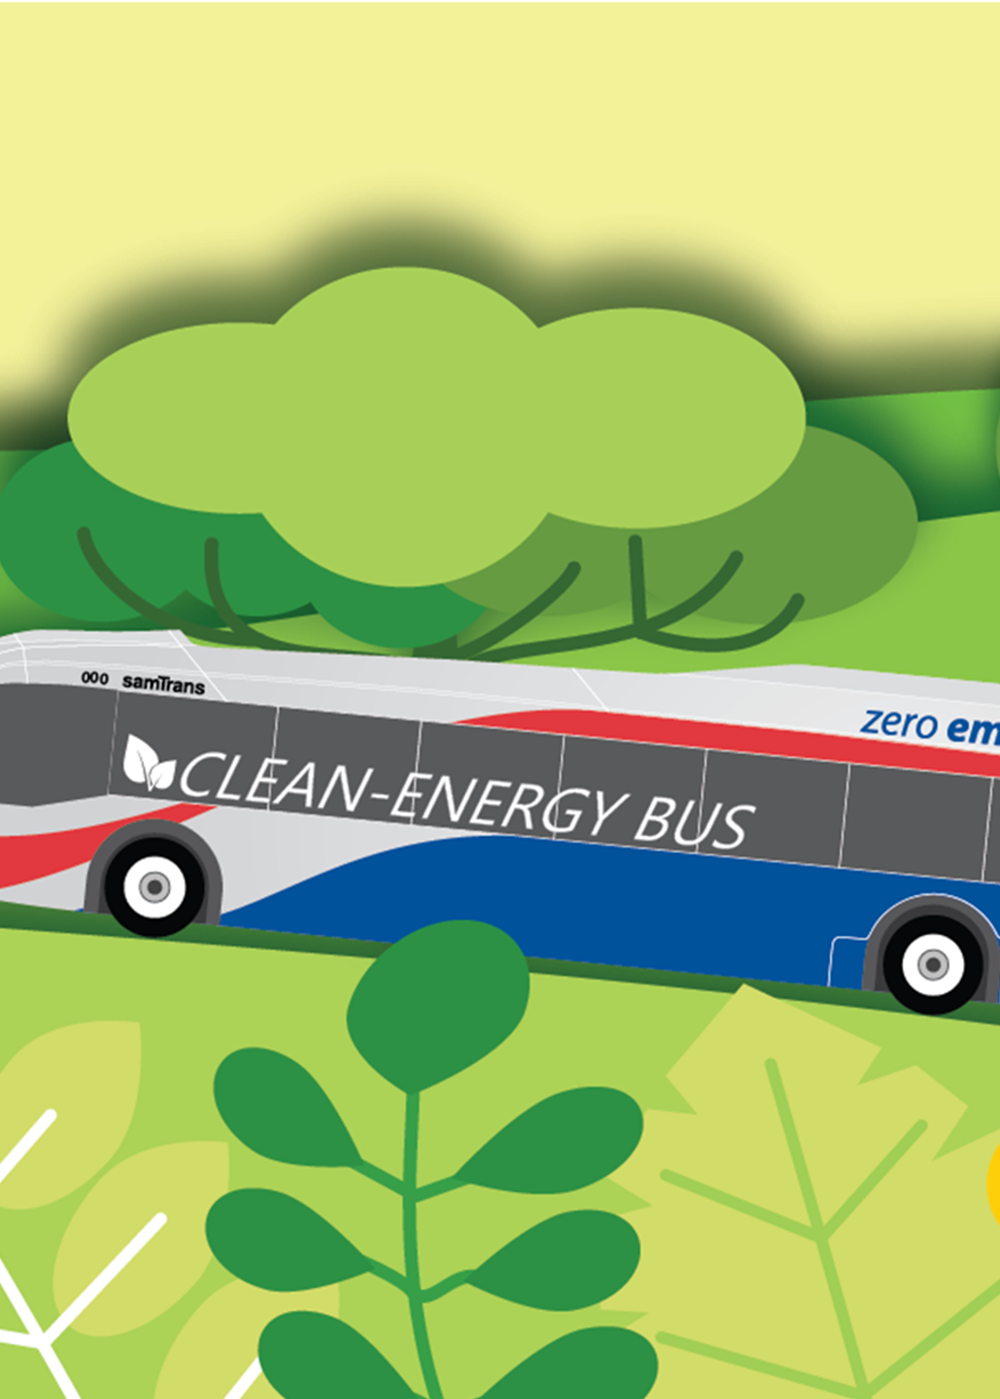 Clean-Energy Bus with Zero Emissions